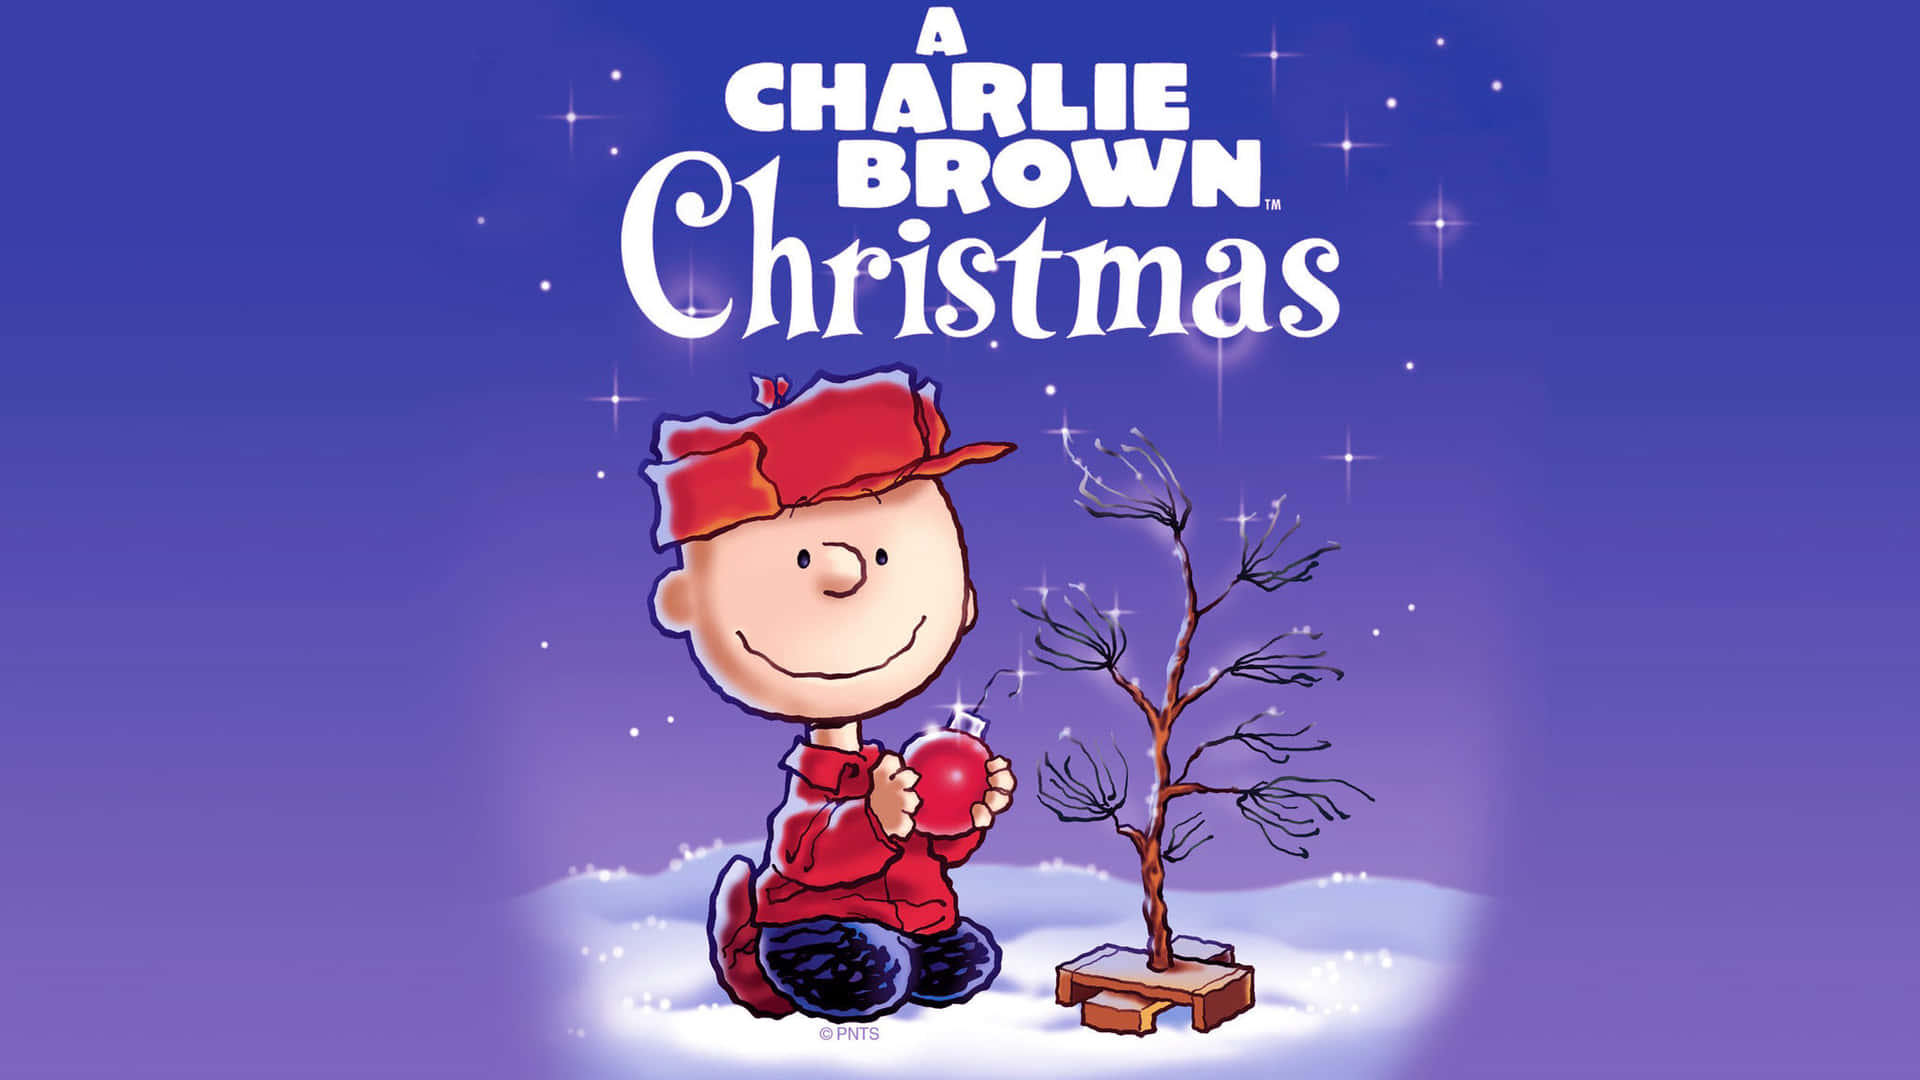 A Charlie Brown Christmas Film Poster